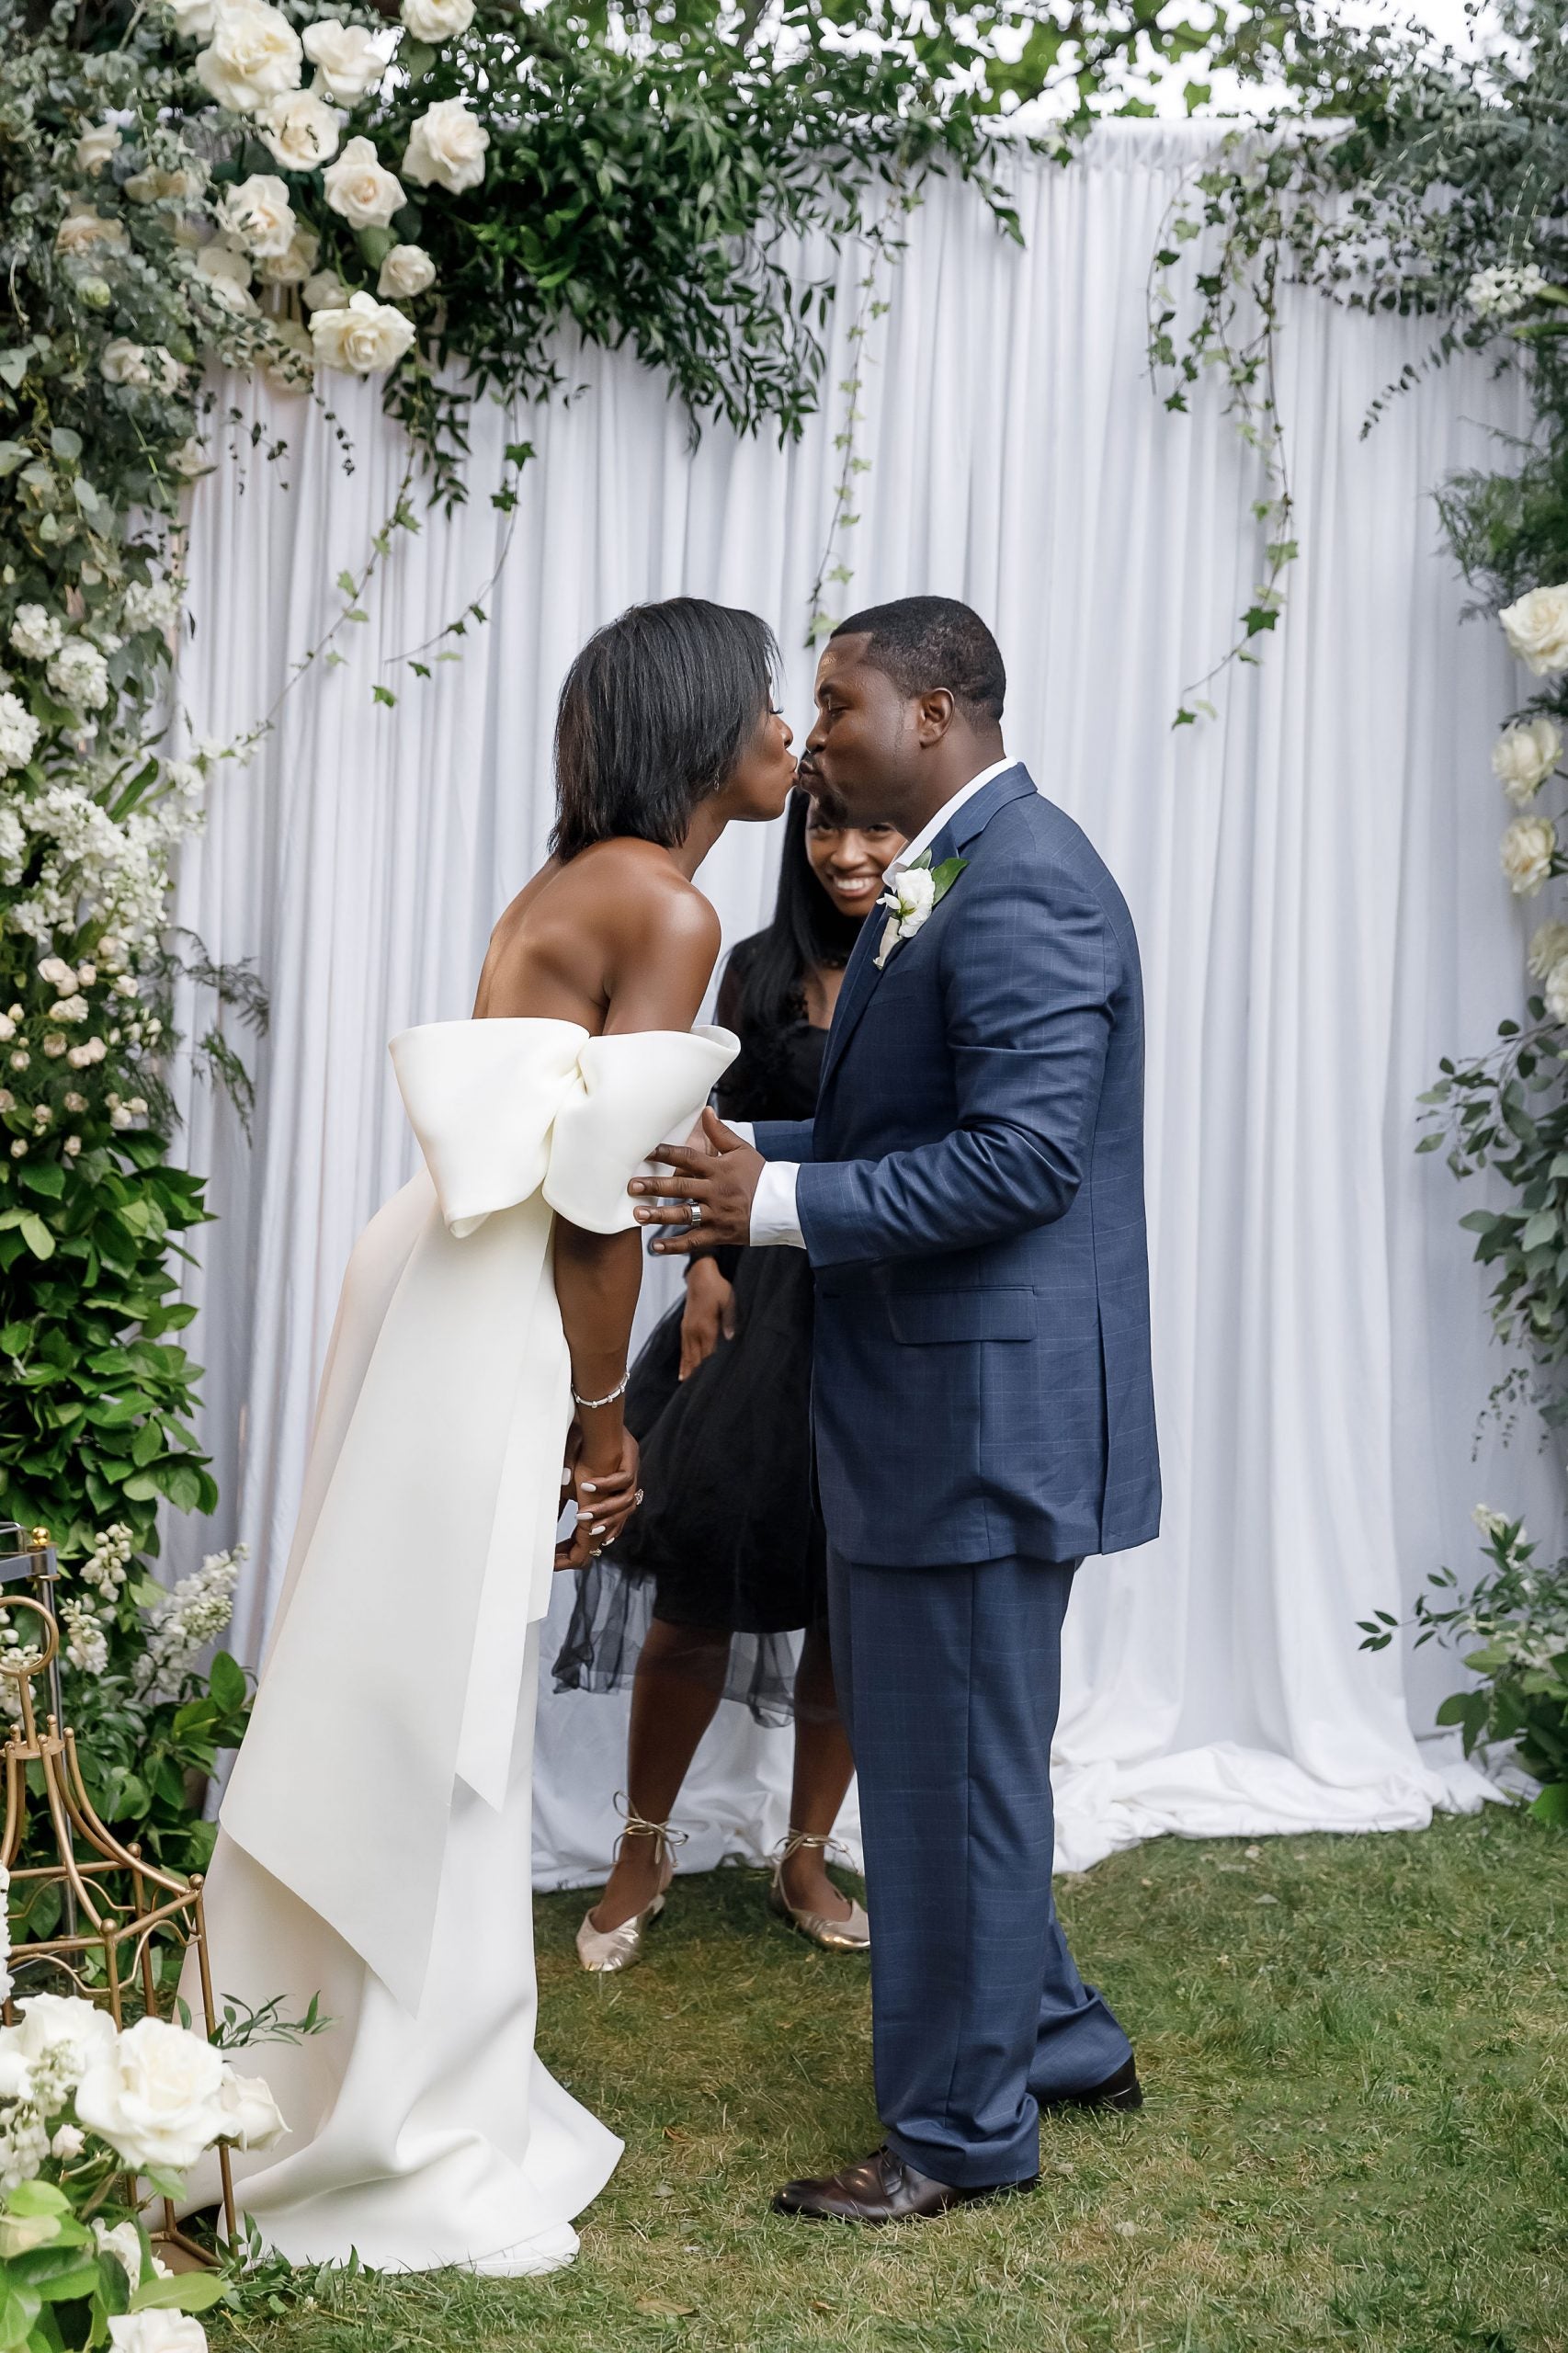 Bridal Bliss: Mills And Johanne's Vow Renewal Was A Family Affair